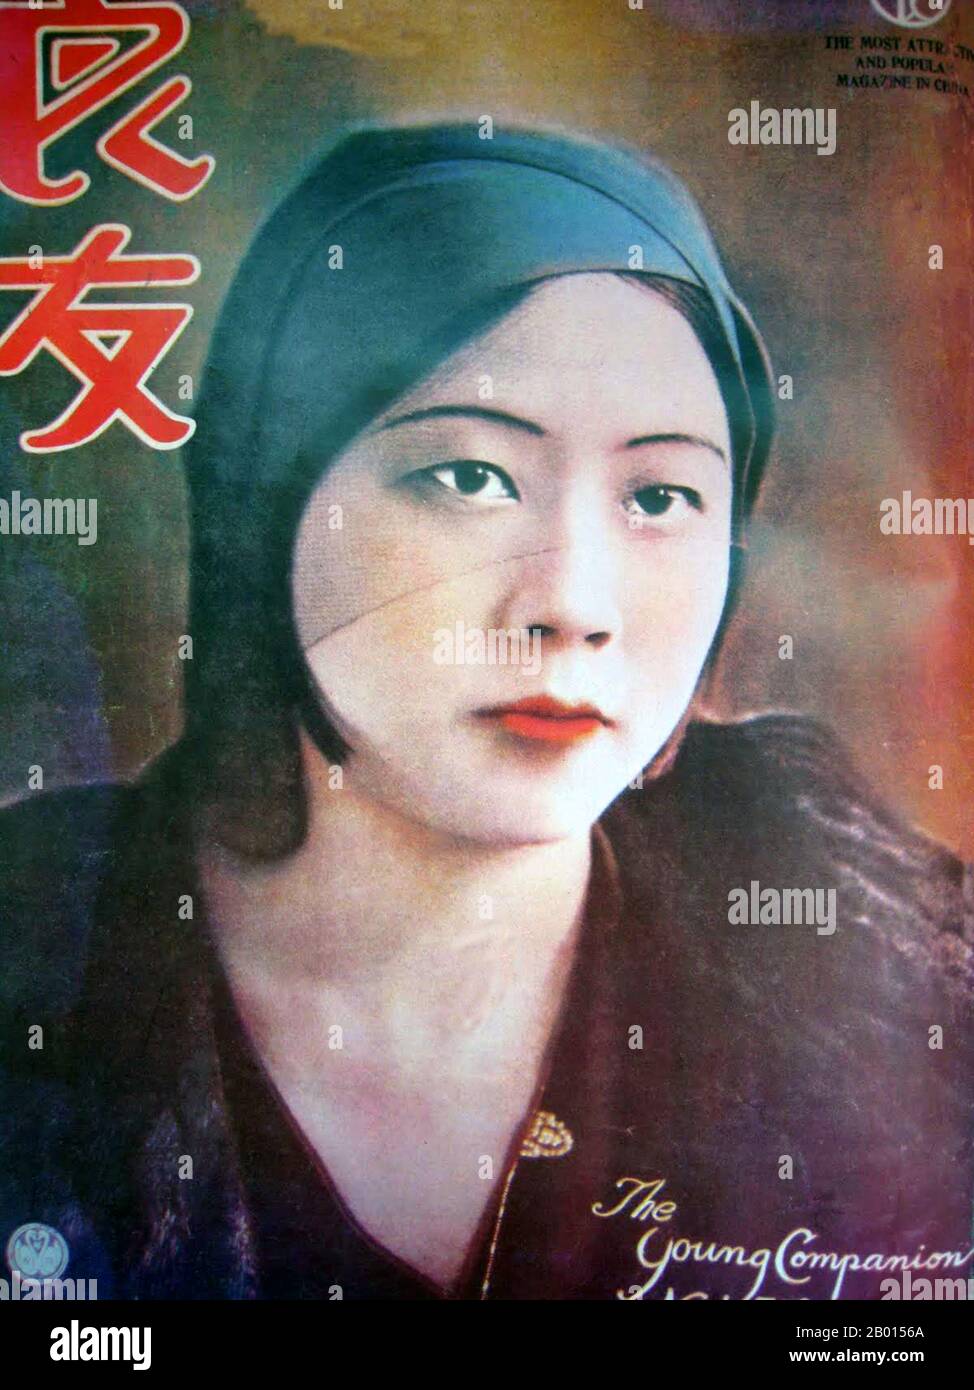 China: Cover of 'The Young Companion' - the Most Attractive and Popular Magazine in China (1930s).   In 1926, Young Companion Pictorial (Liang You, literally 'good friend') was established in Shanghai as the first colored variety magazine. During the 1920s and 30s, when printed news was rare and precious, Companion was already a pioneer in providing pictorial reports to the public. It quickly became the publication that chronicled and provoked China’s passion for decades to come. Stock Photo